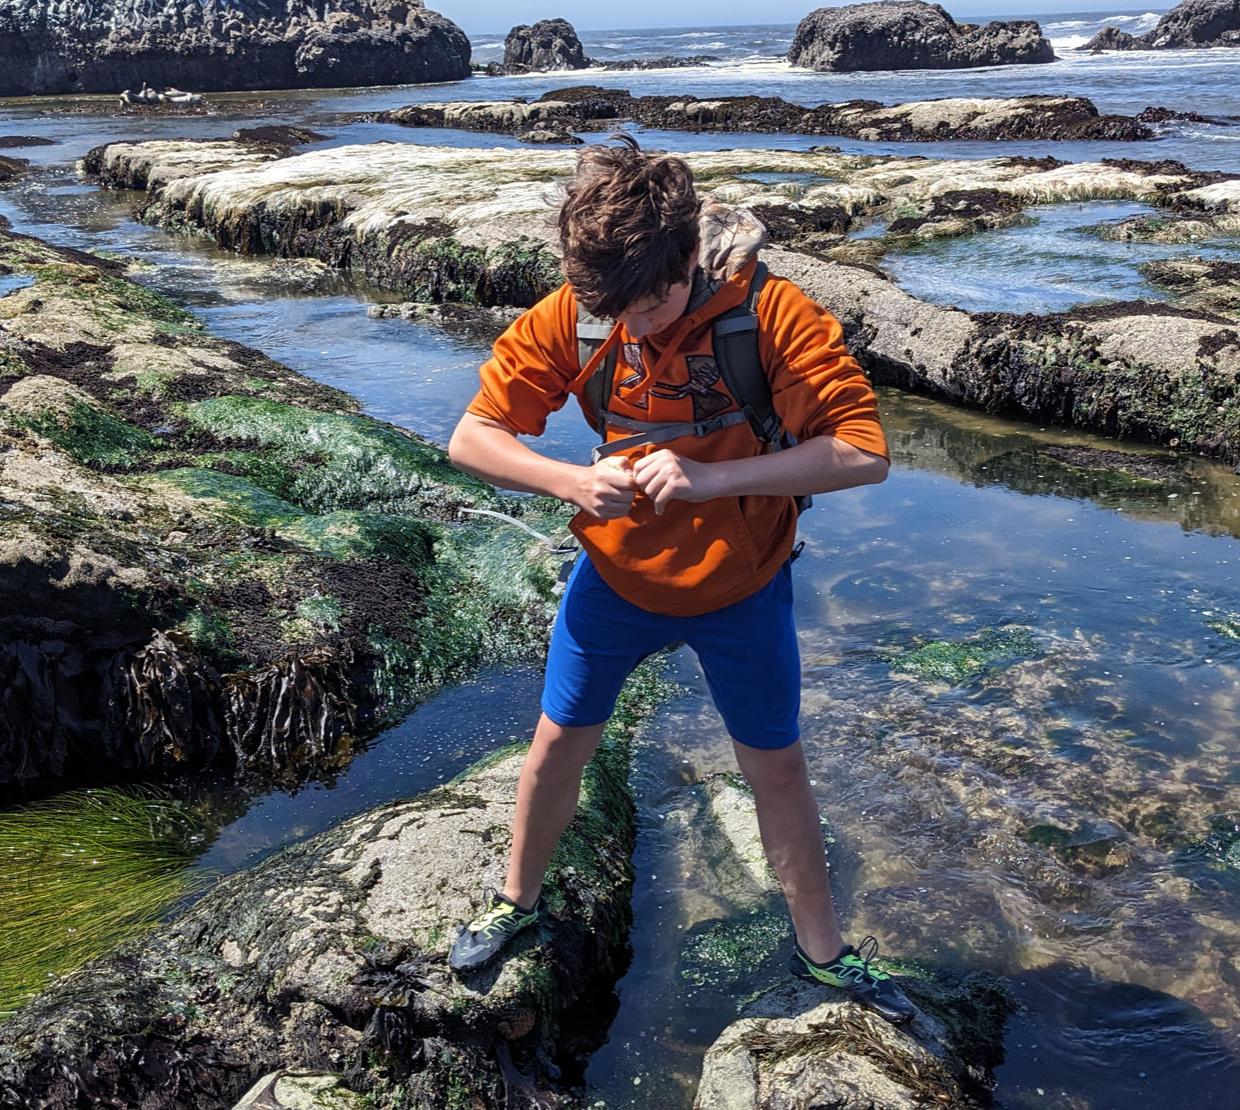 A kid stands in the water holding wildlife.